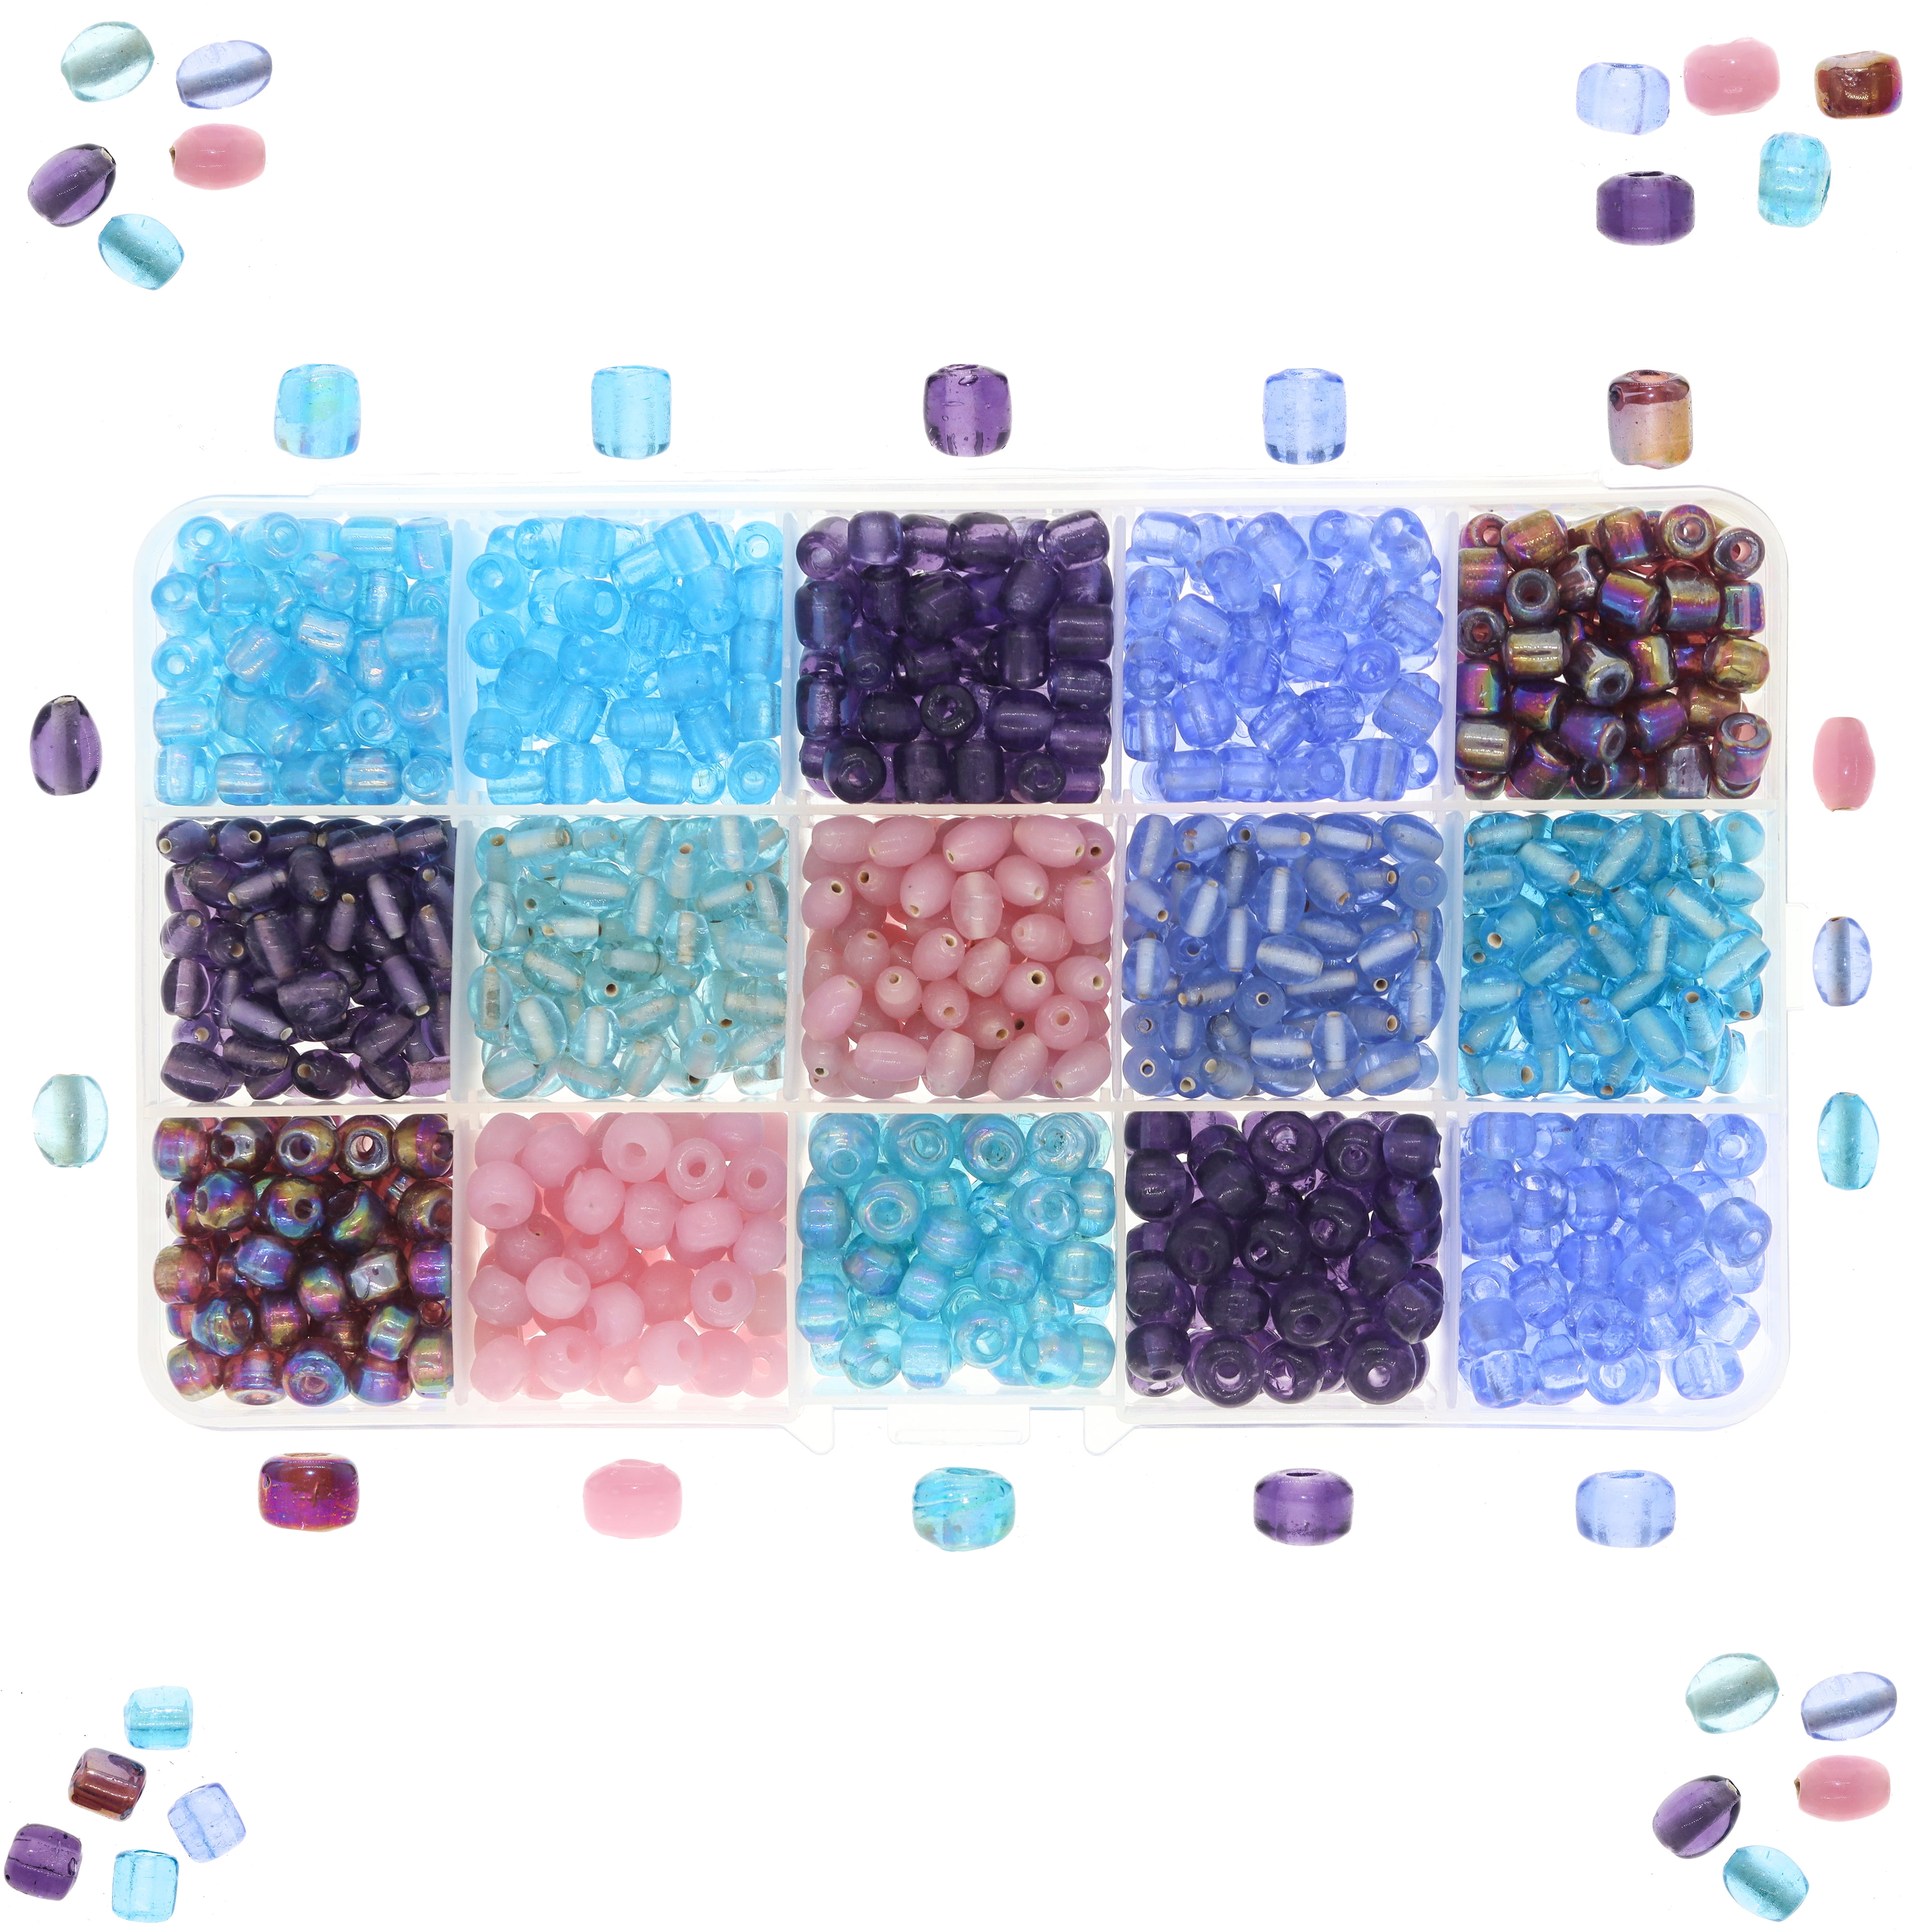 Over 1100 Glass Pony Beads for Jewelry Making Supplies for Adults